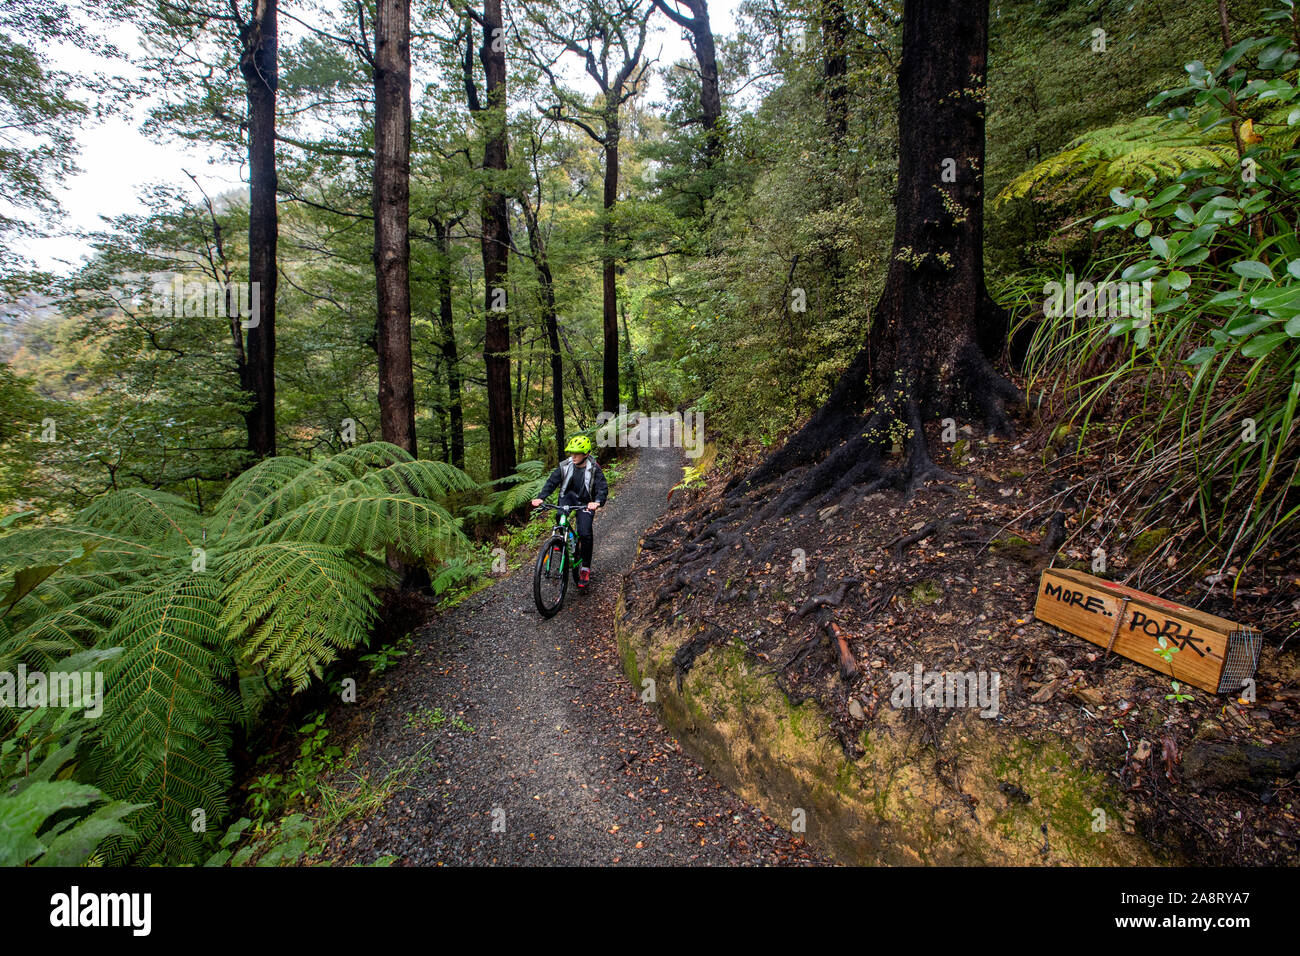 Cyclists on the Link Pathway, Marlborough Sounds, New Zealand Stock Photo